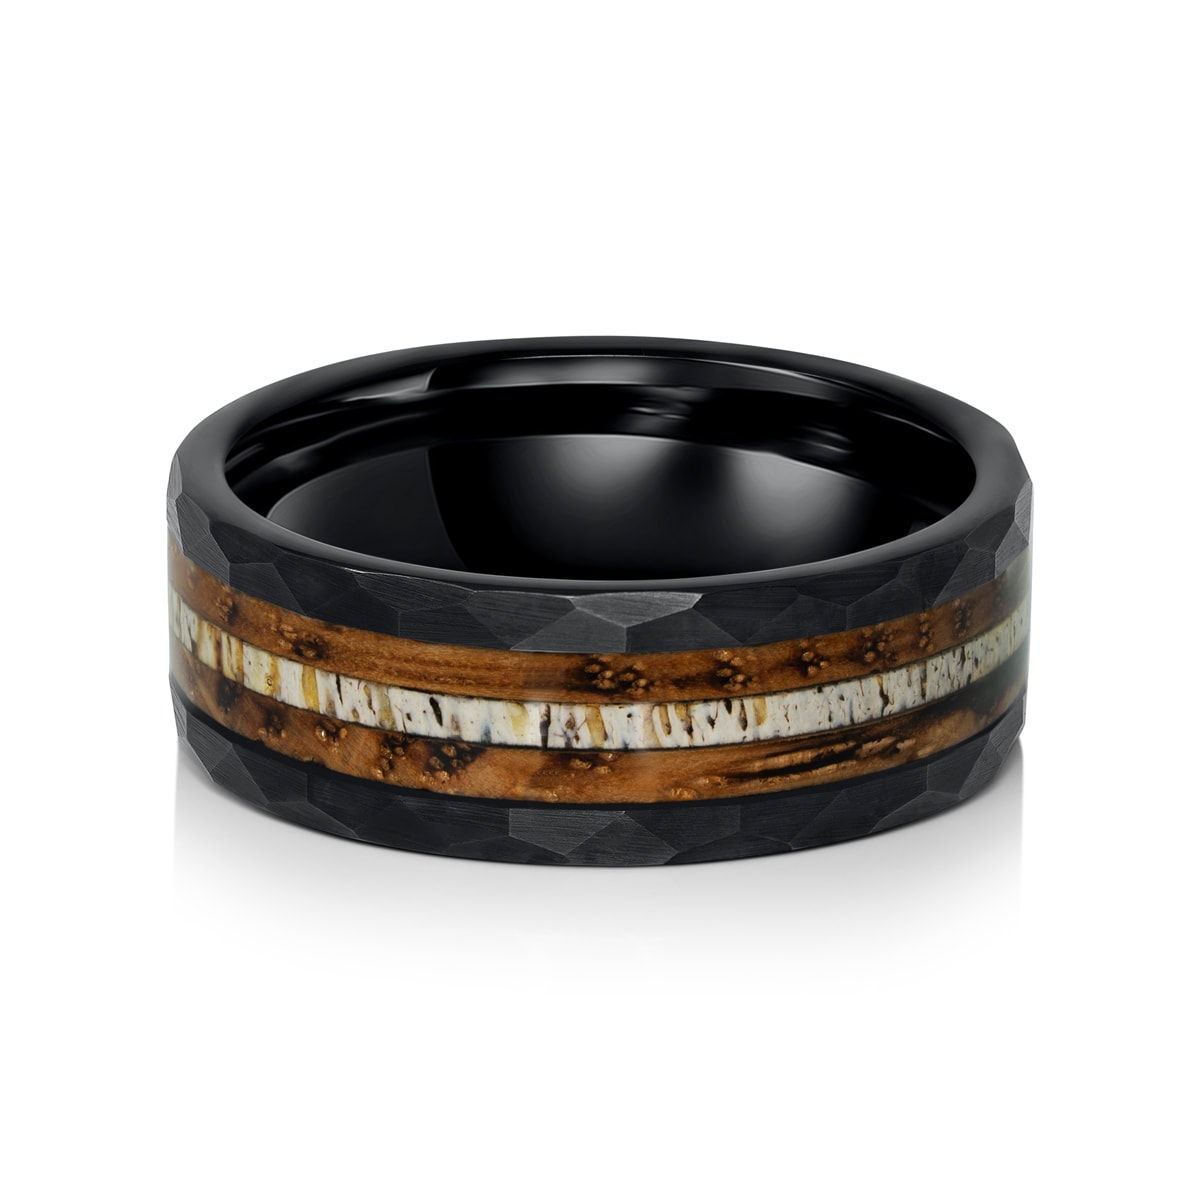 Mens ring with whiskey barrel wood inlay